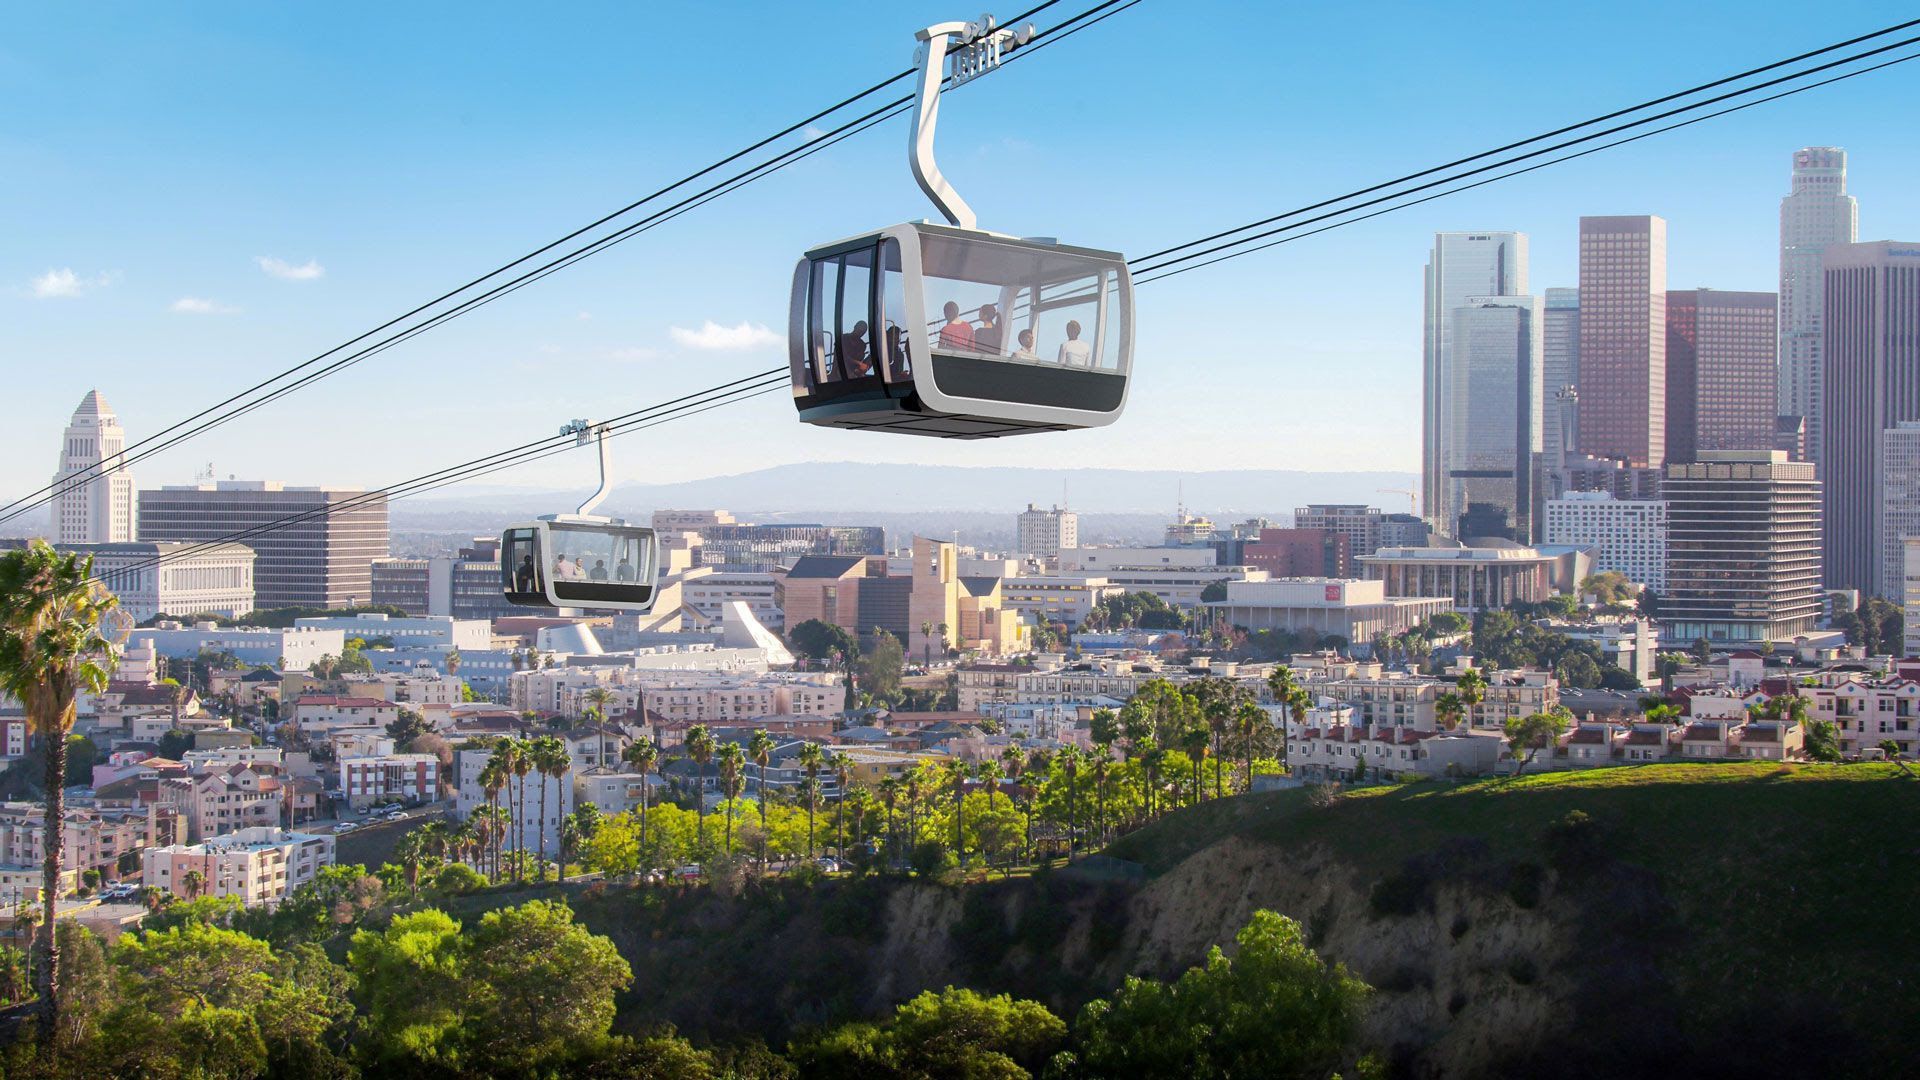 Rendering of an air gondola system proposed for Dodger Stadium in Los Angeles